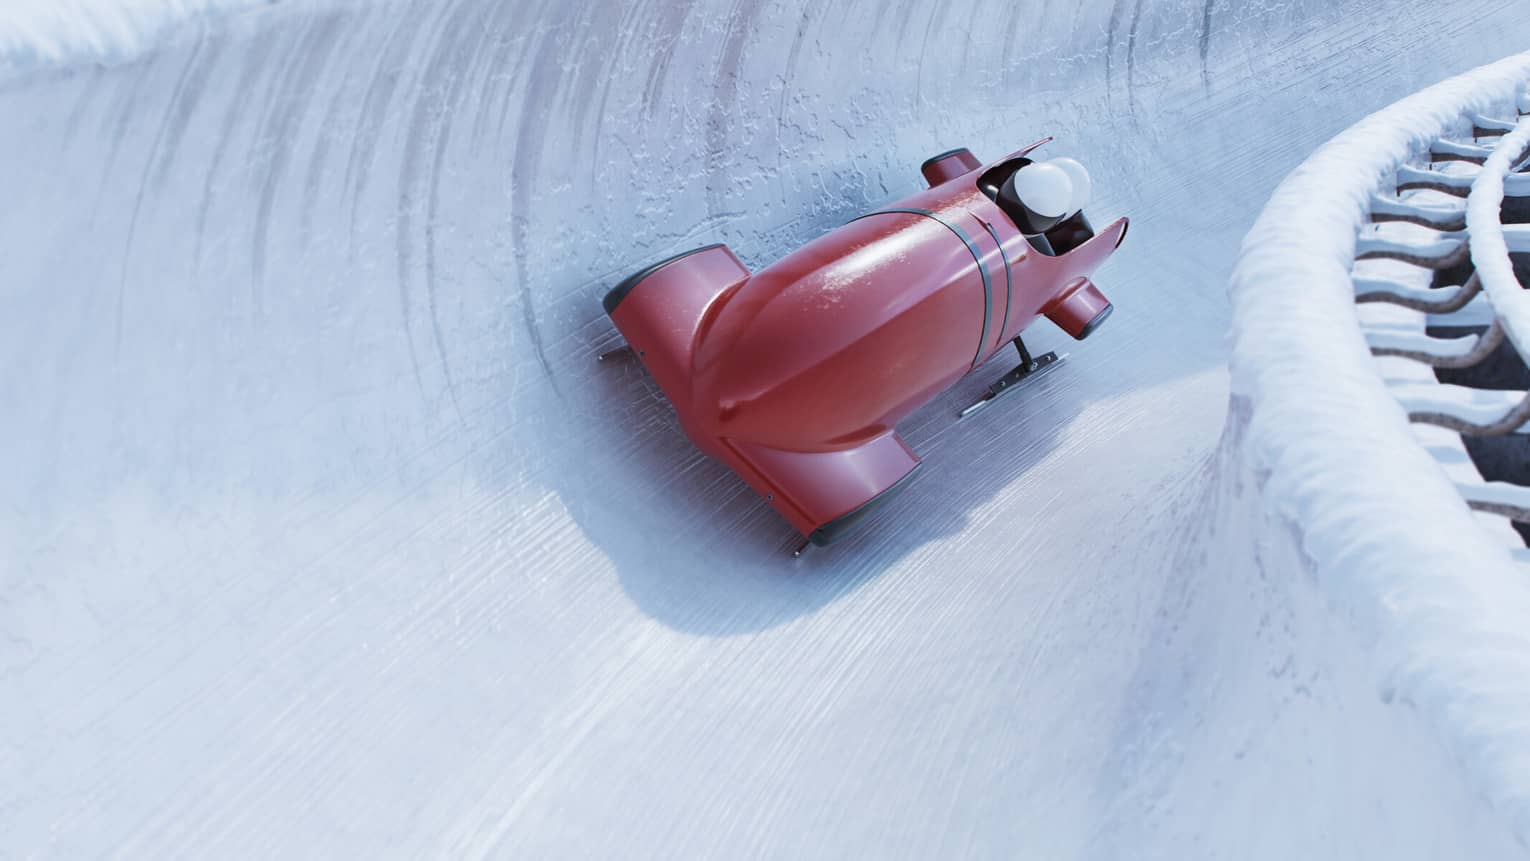 Front view of a bobsleigh zipping around a corner on a concave icy track, the helmets of two riders visible from the cockpit.